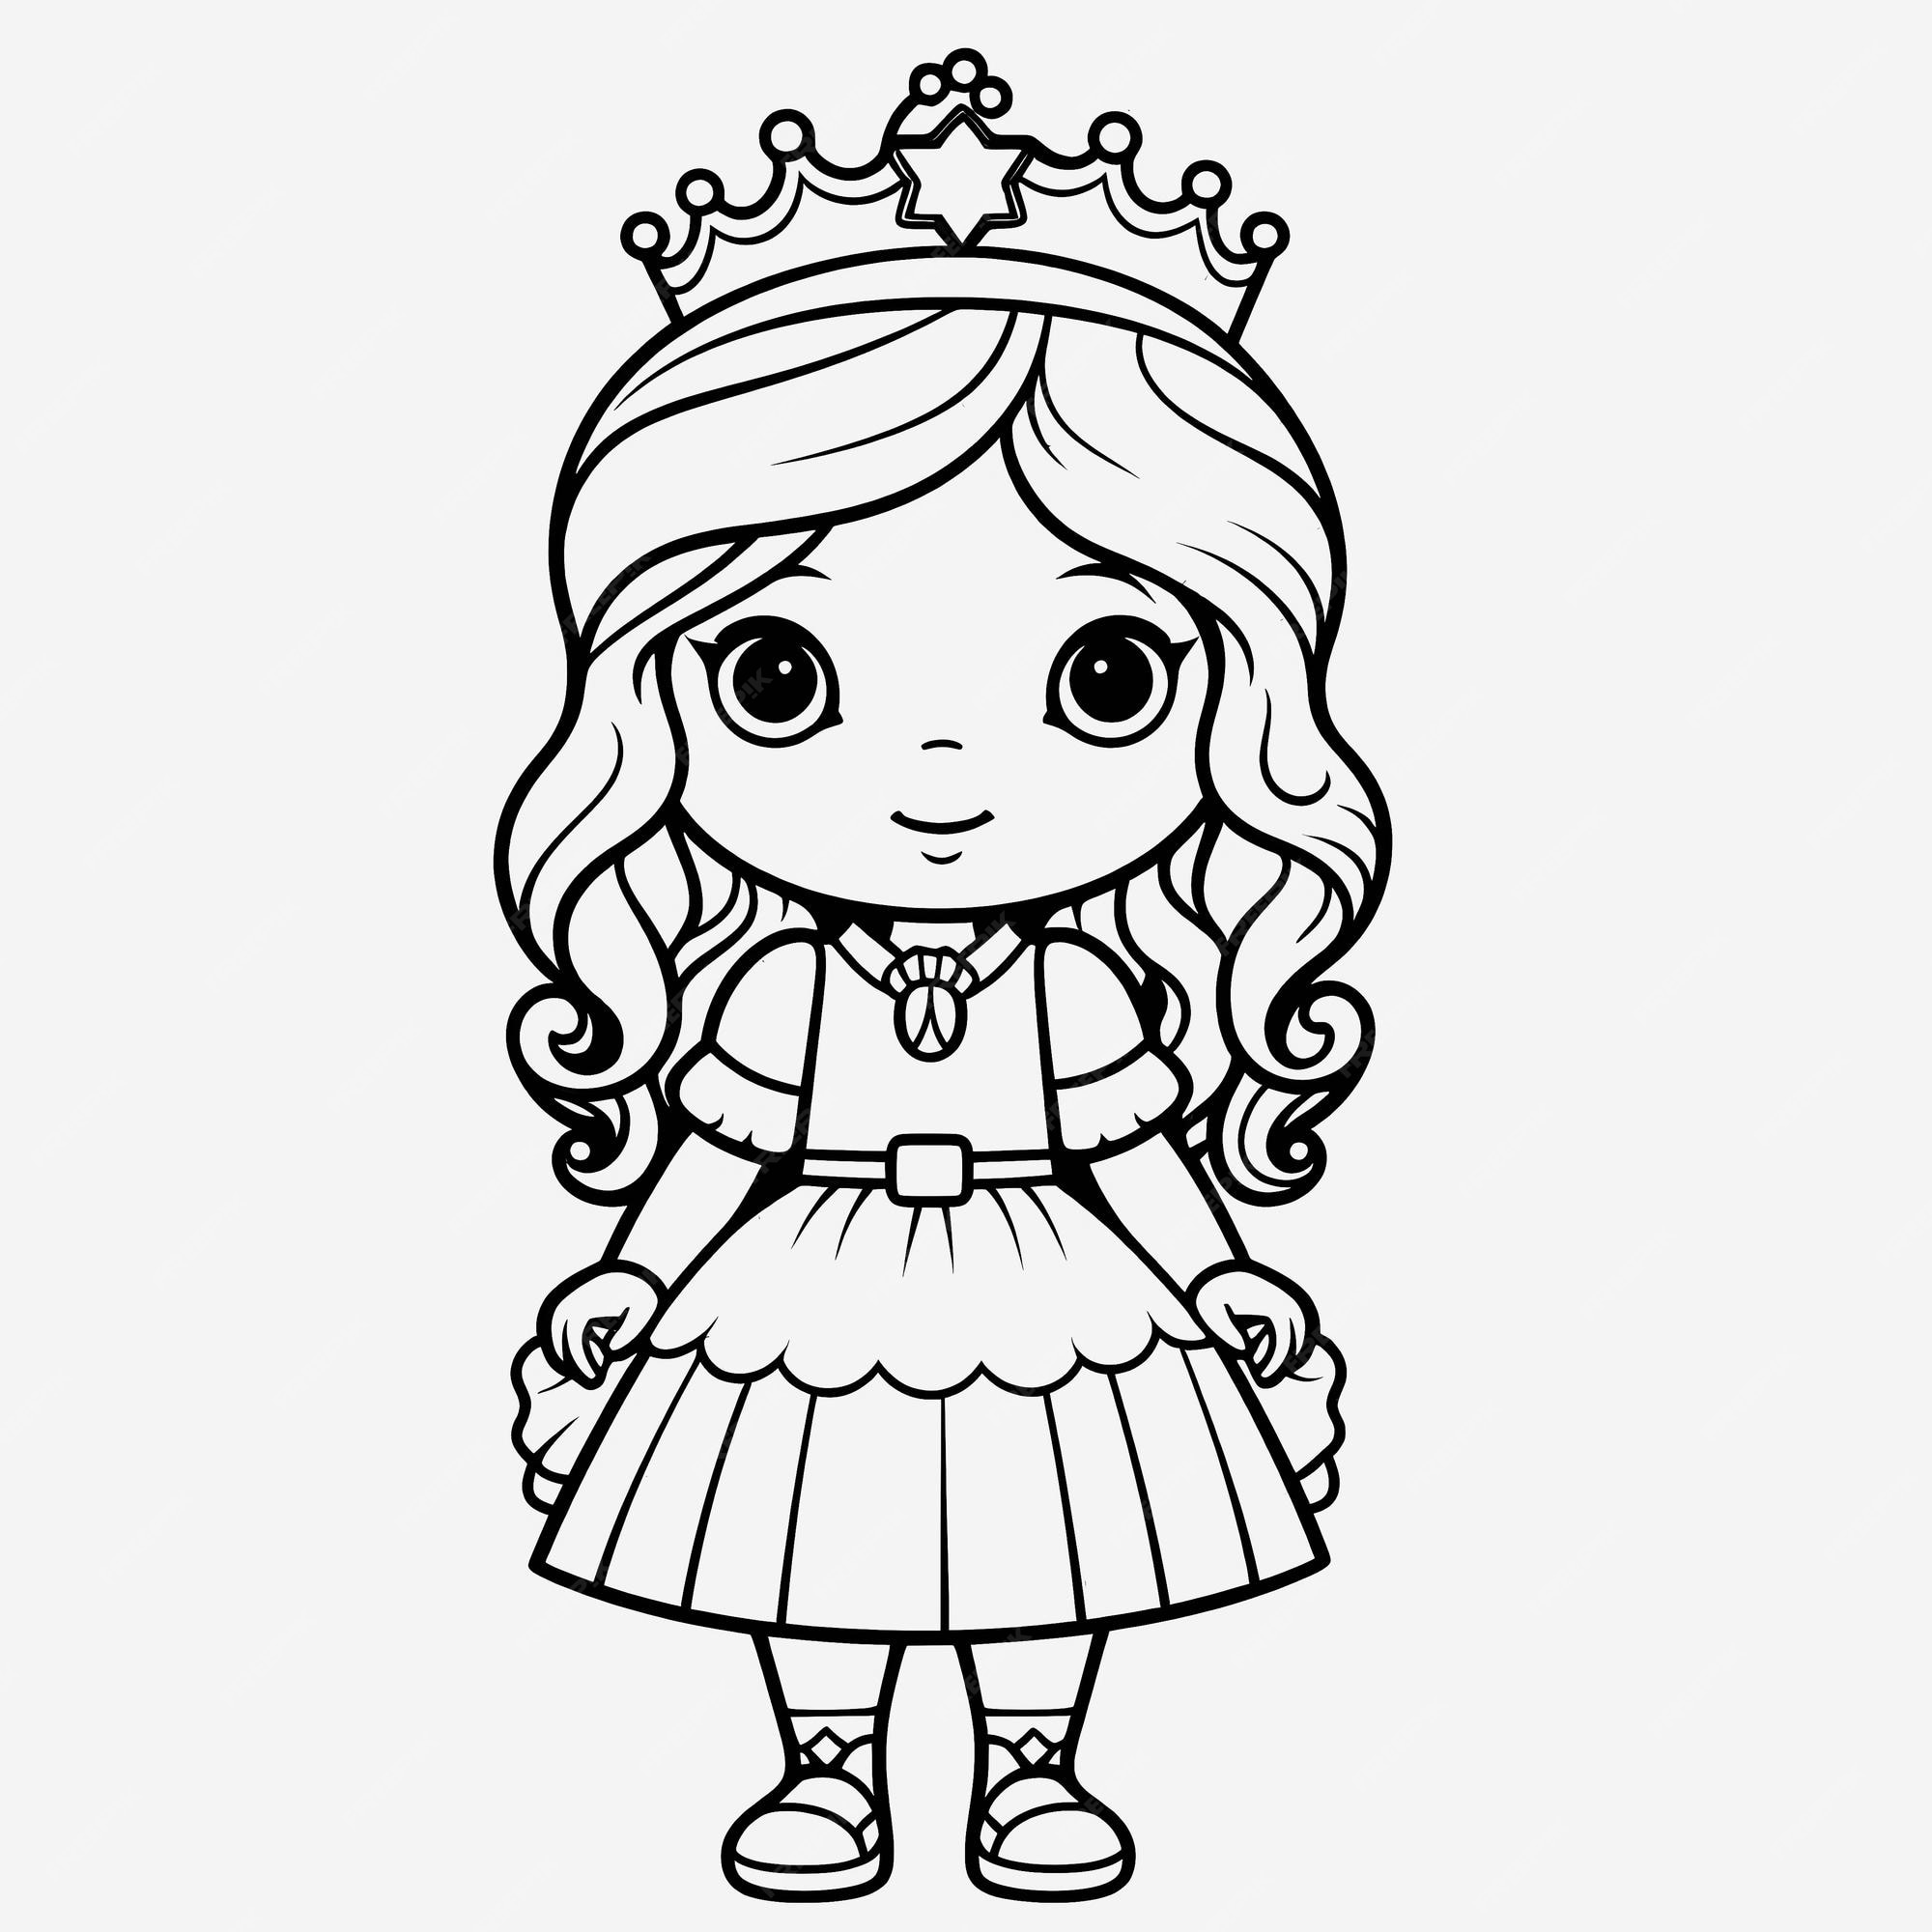 Premium photo simple kids coloring page flat vector illustration of a cute princess with crisp lines